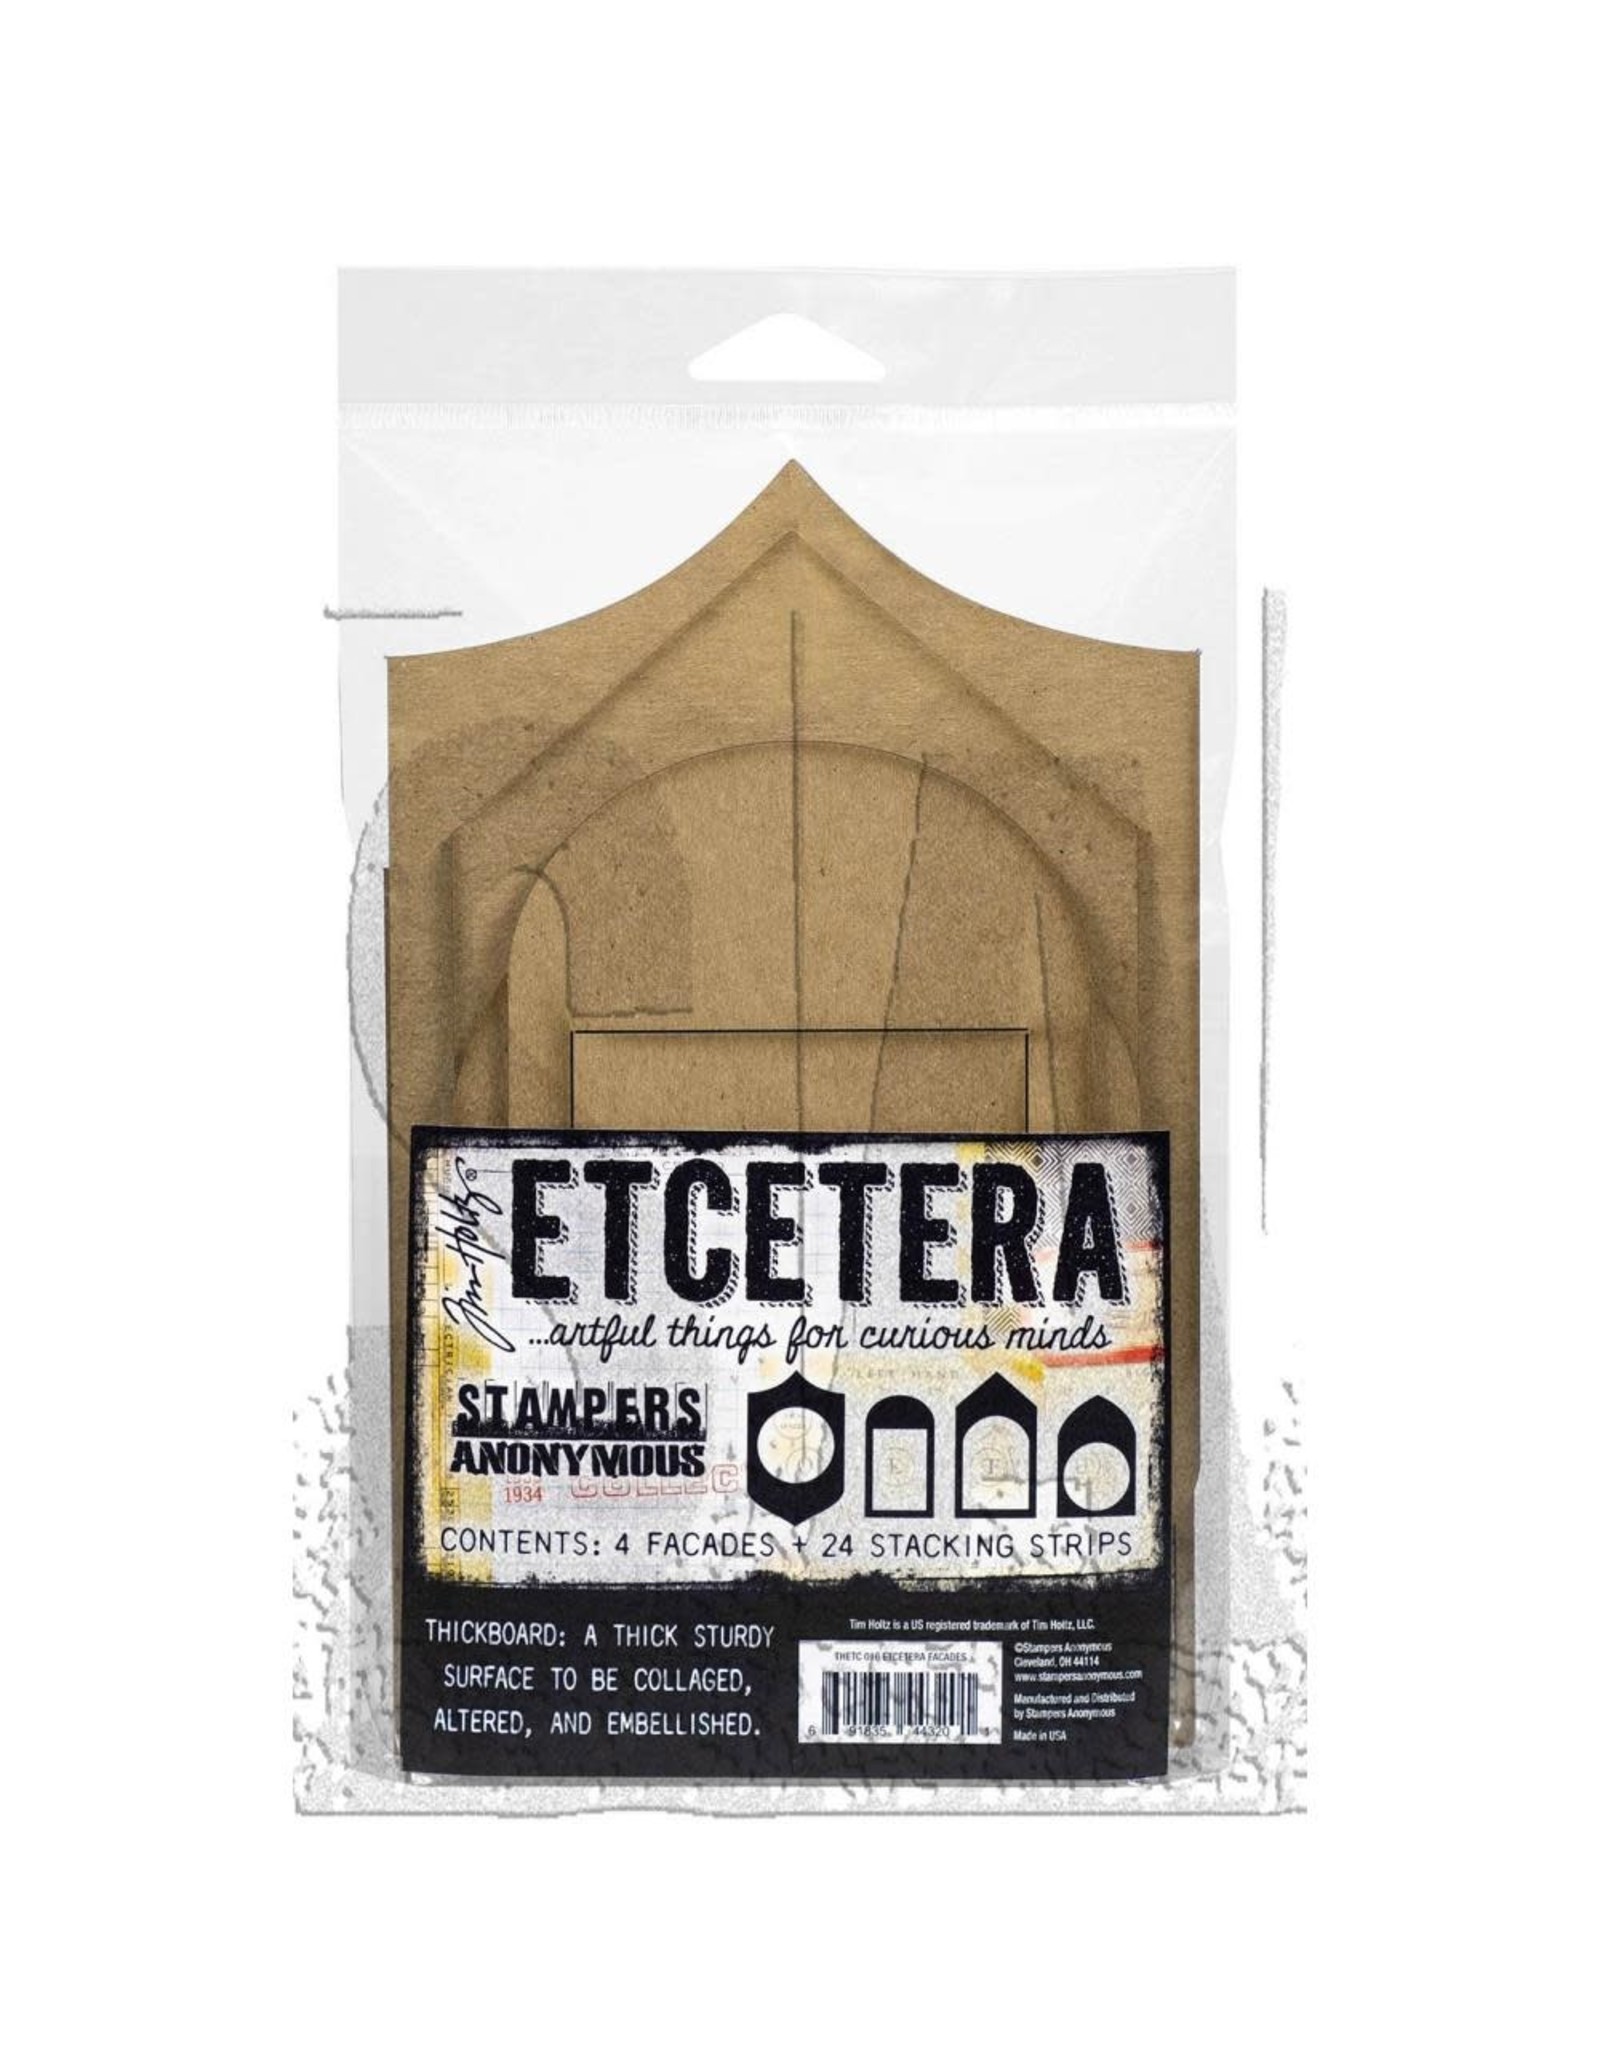 STAMPERS ANONYMOUS STAMPERS ANONYMOUS TIM HOLTZ ETCETERA FACADES